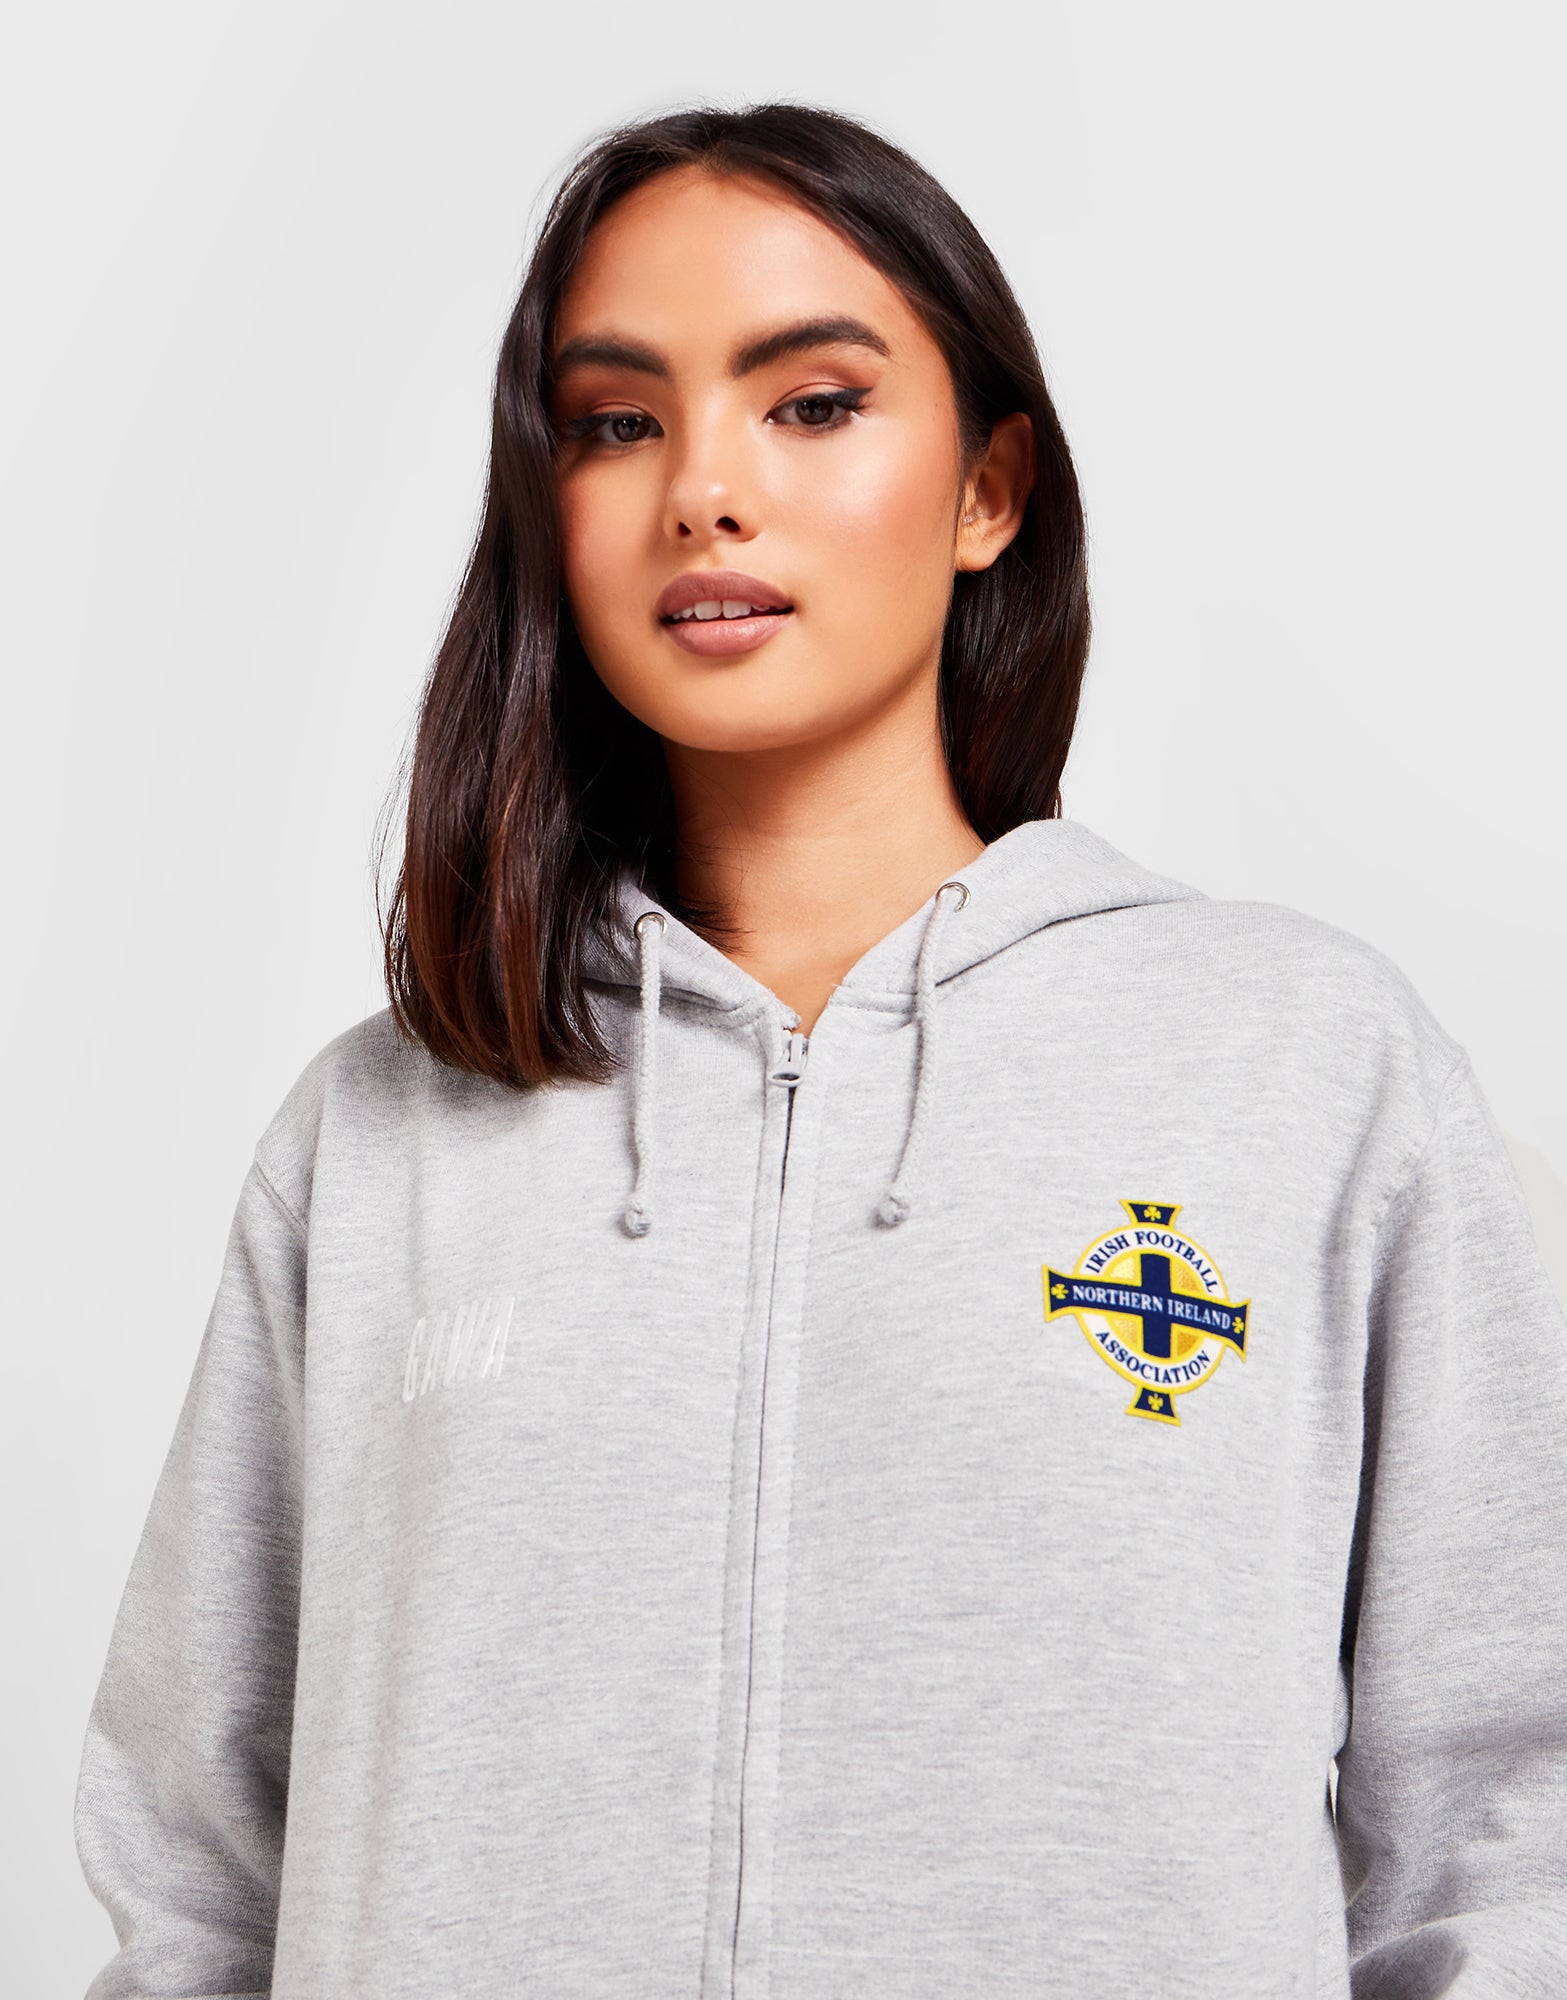 Official Northern Ireland Crest Zip Hoodie Womens - Grey Marl - The World Football Store